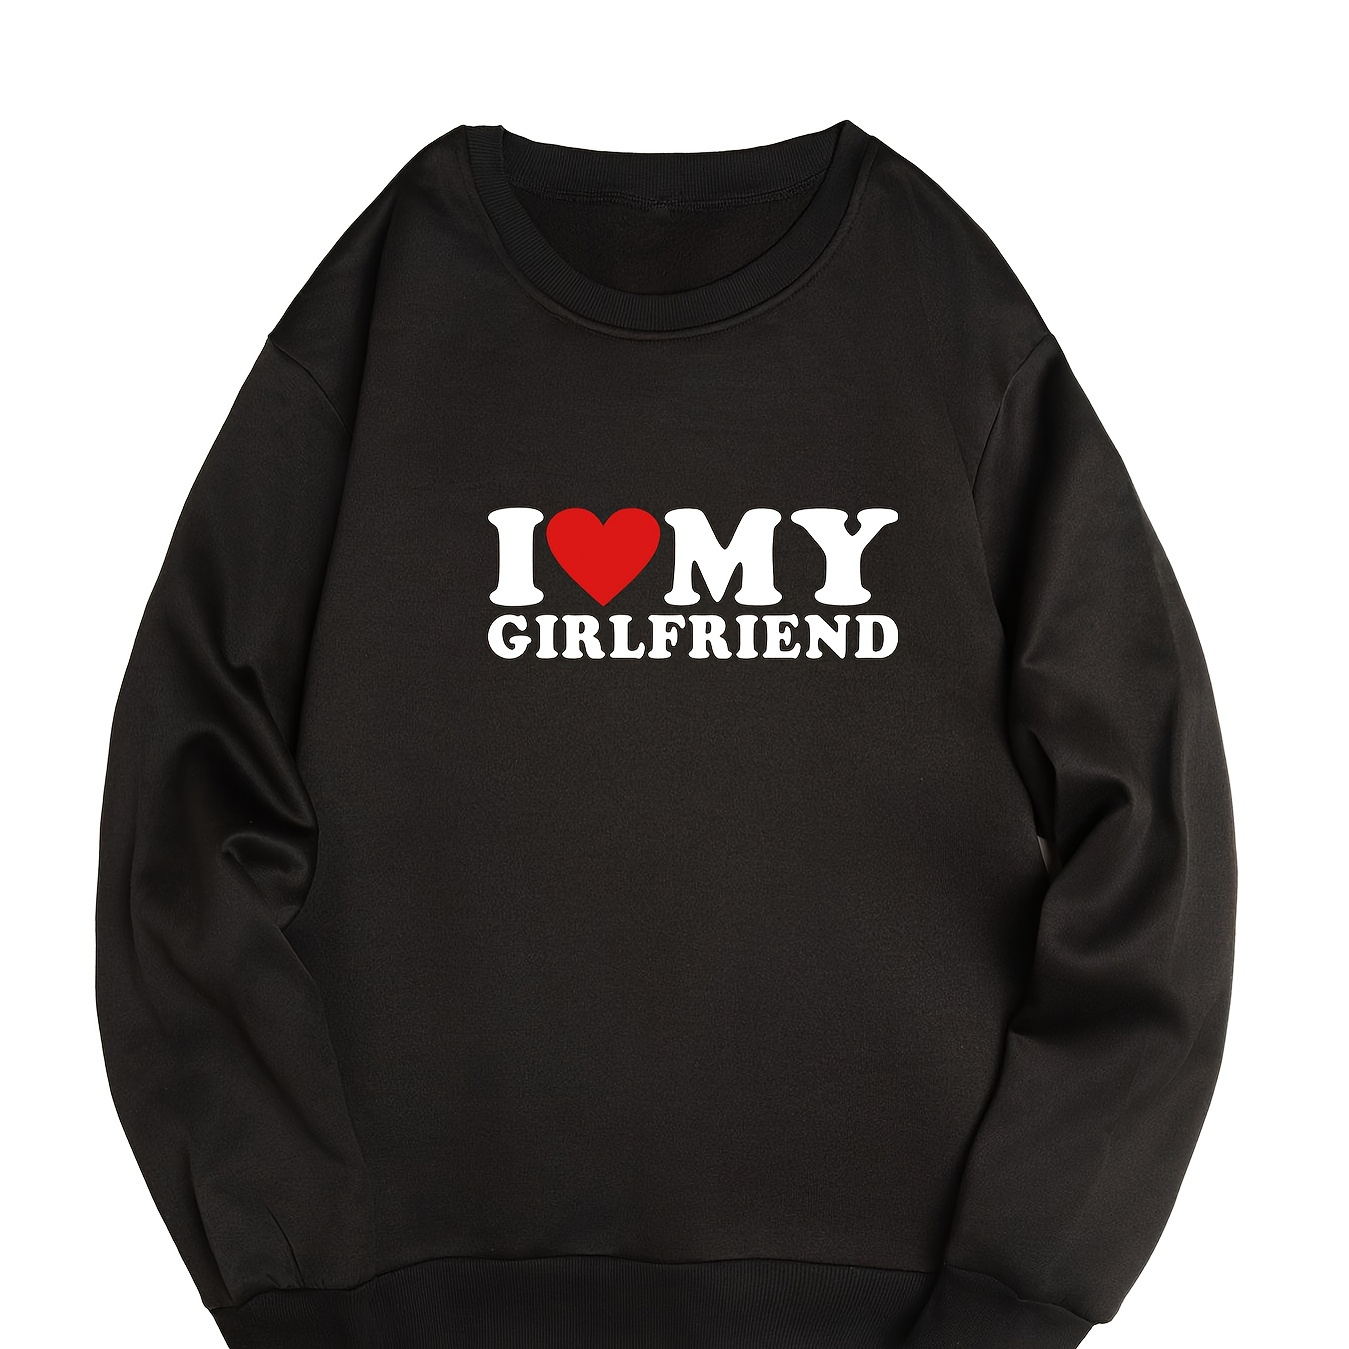 

I Love My Girlfriend Letter Print Men's Sweatshirt, Fashion Loose Street Style Casual Long Sleeve Crew Neck Sports Loose Pullover Top, Men's Clothing For Spring And Autumn